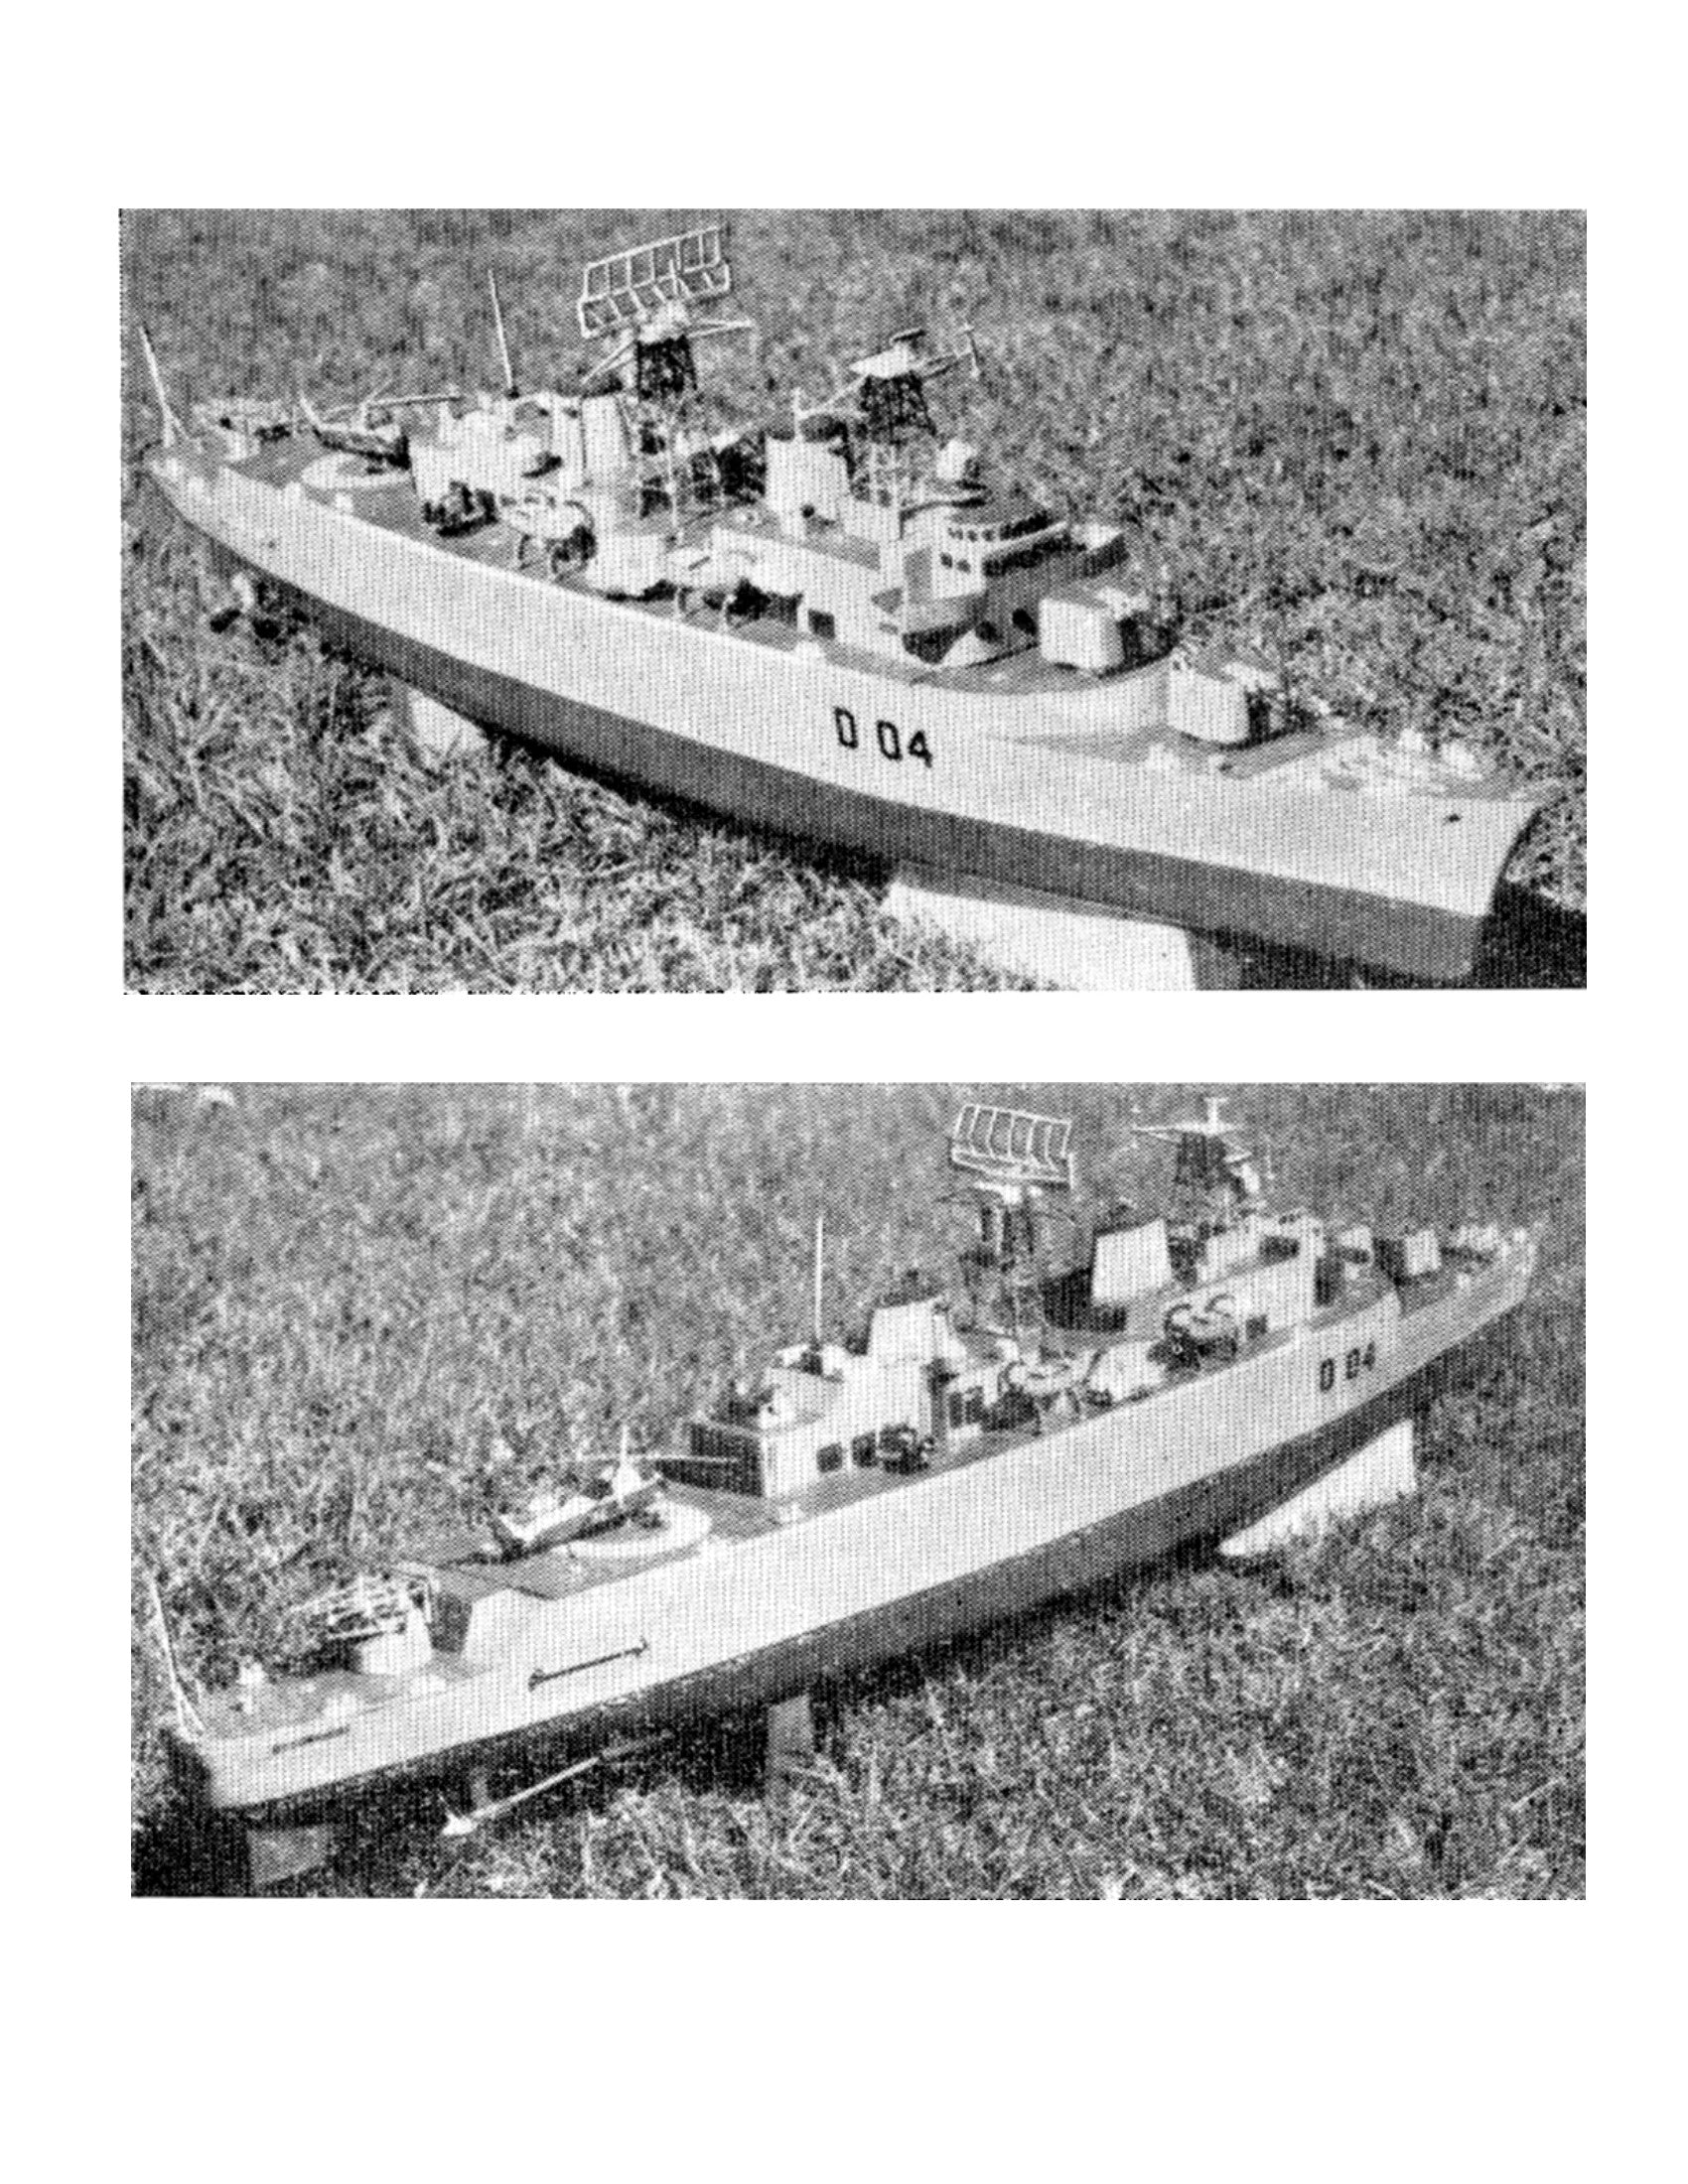 full size printed plan guided missile ship  scale 1:192  length 32 ½” for r/c